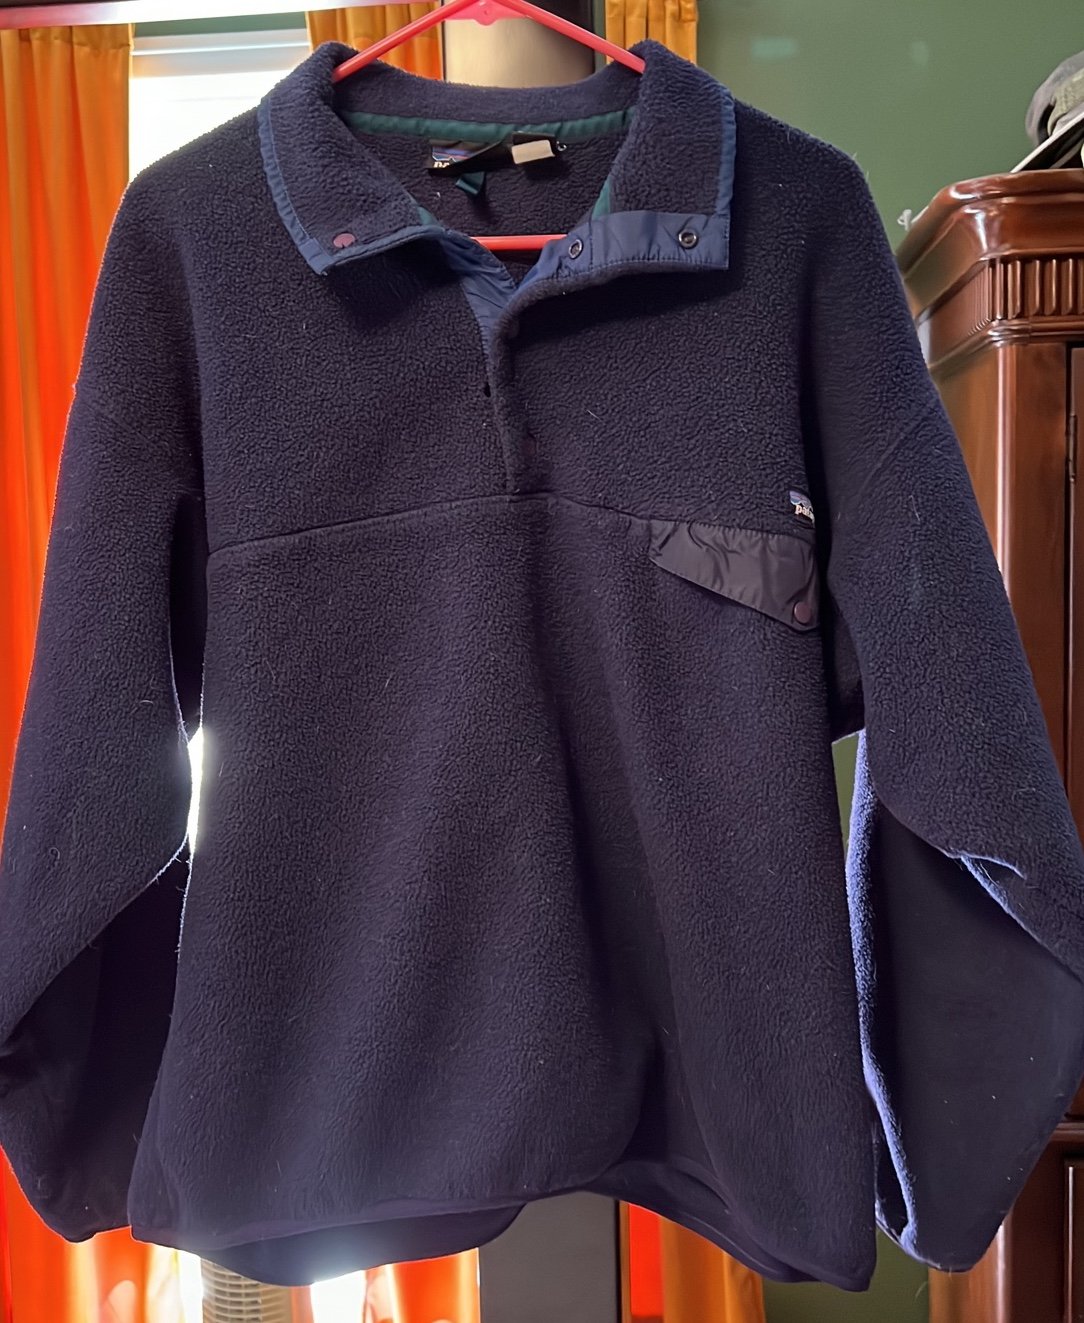 Special offer  Patagonia fleece pullover P9X2fjMo2 Everyday Low Prices